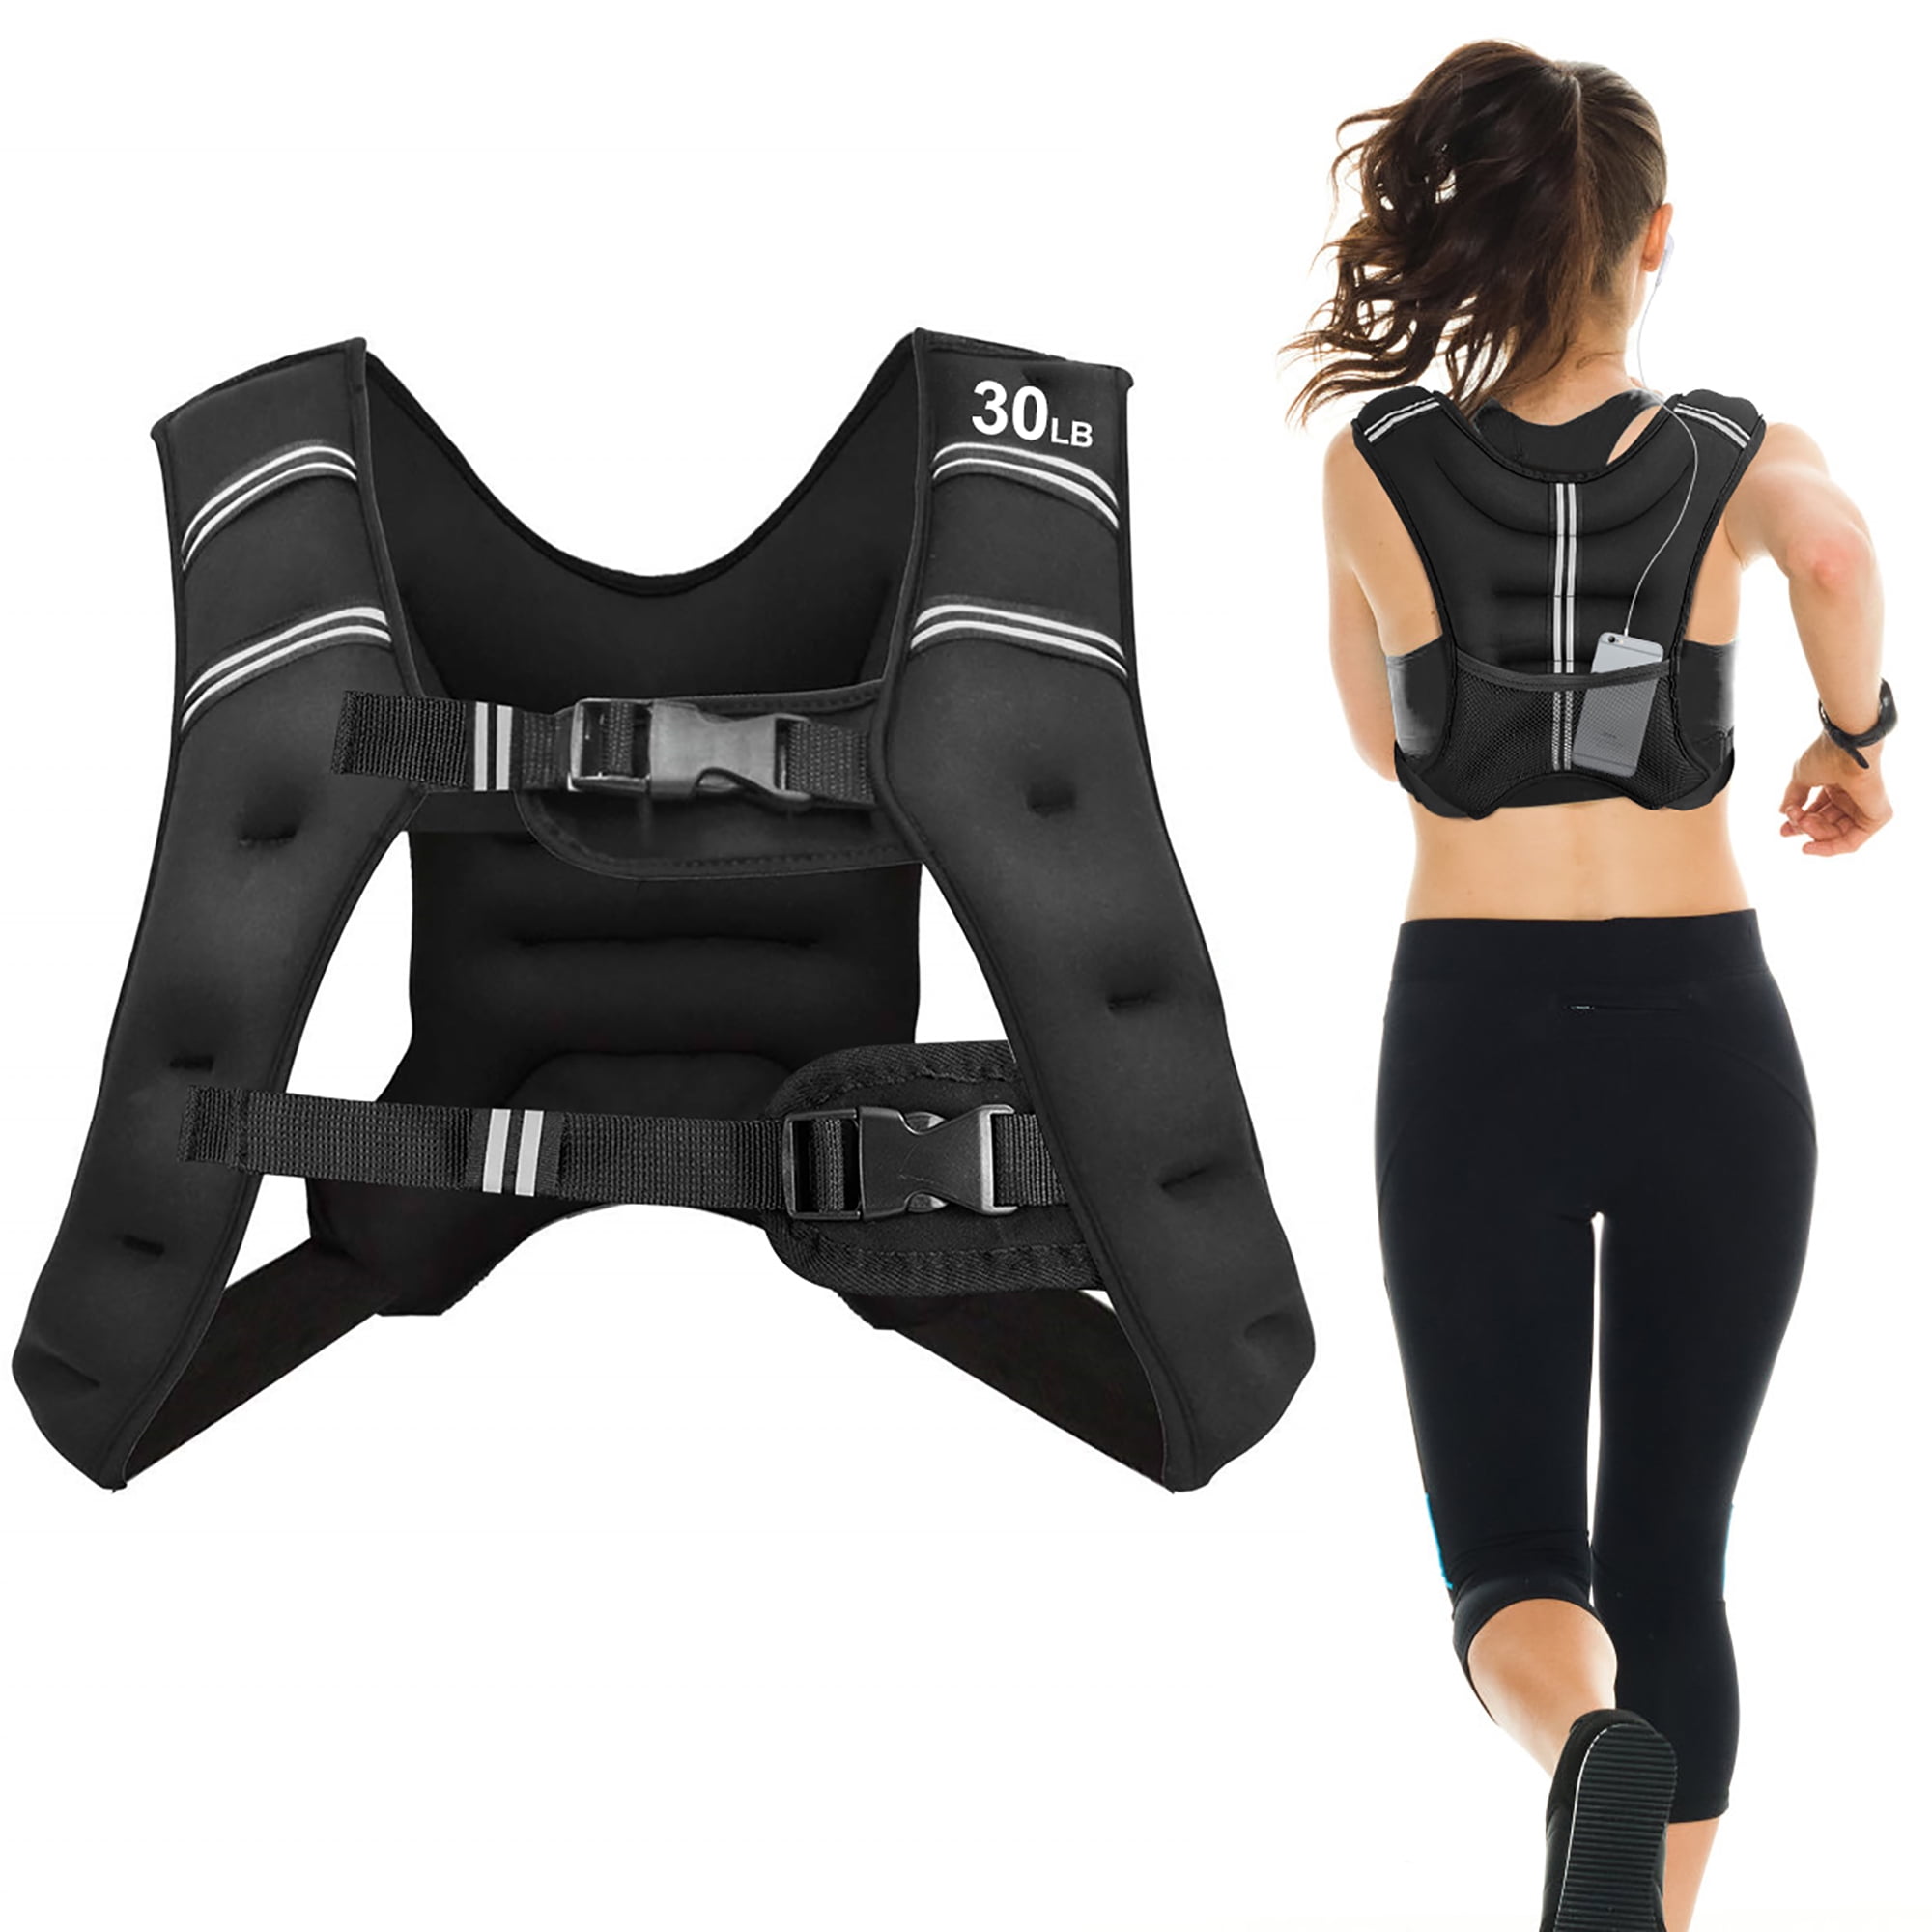 20 lbs Body Weight Equipment for Cardio Workout 10 Neoprene Weighted Vest 15 